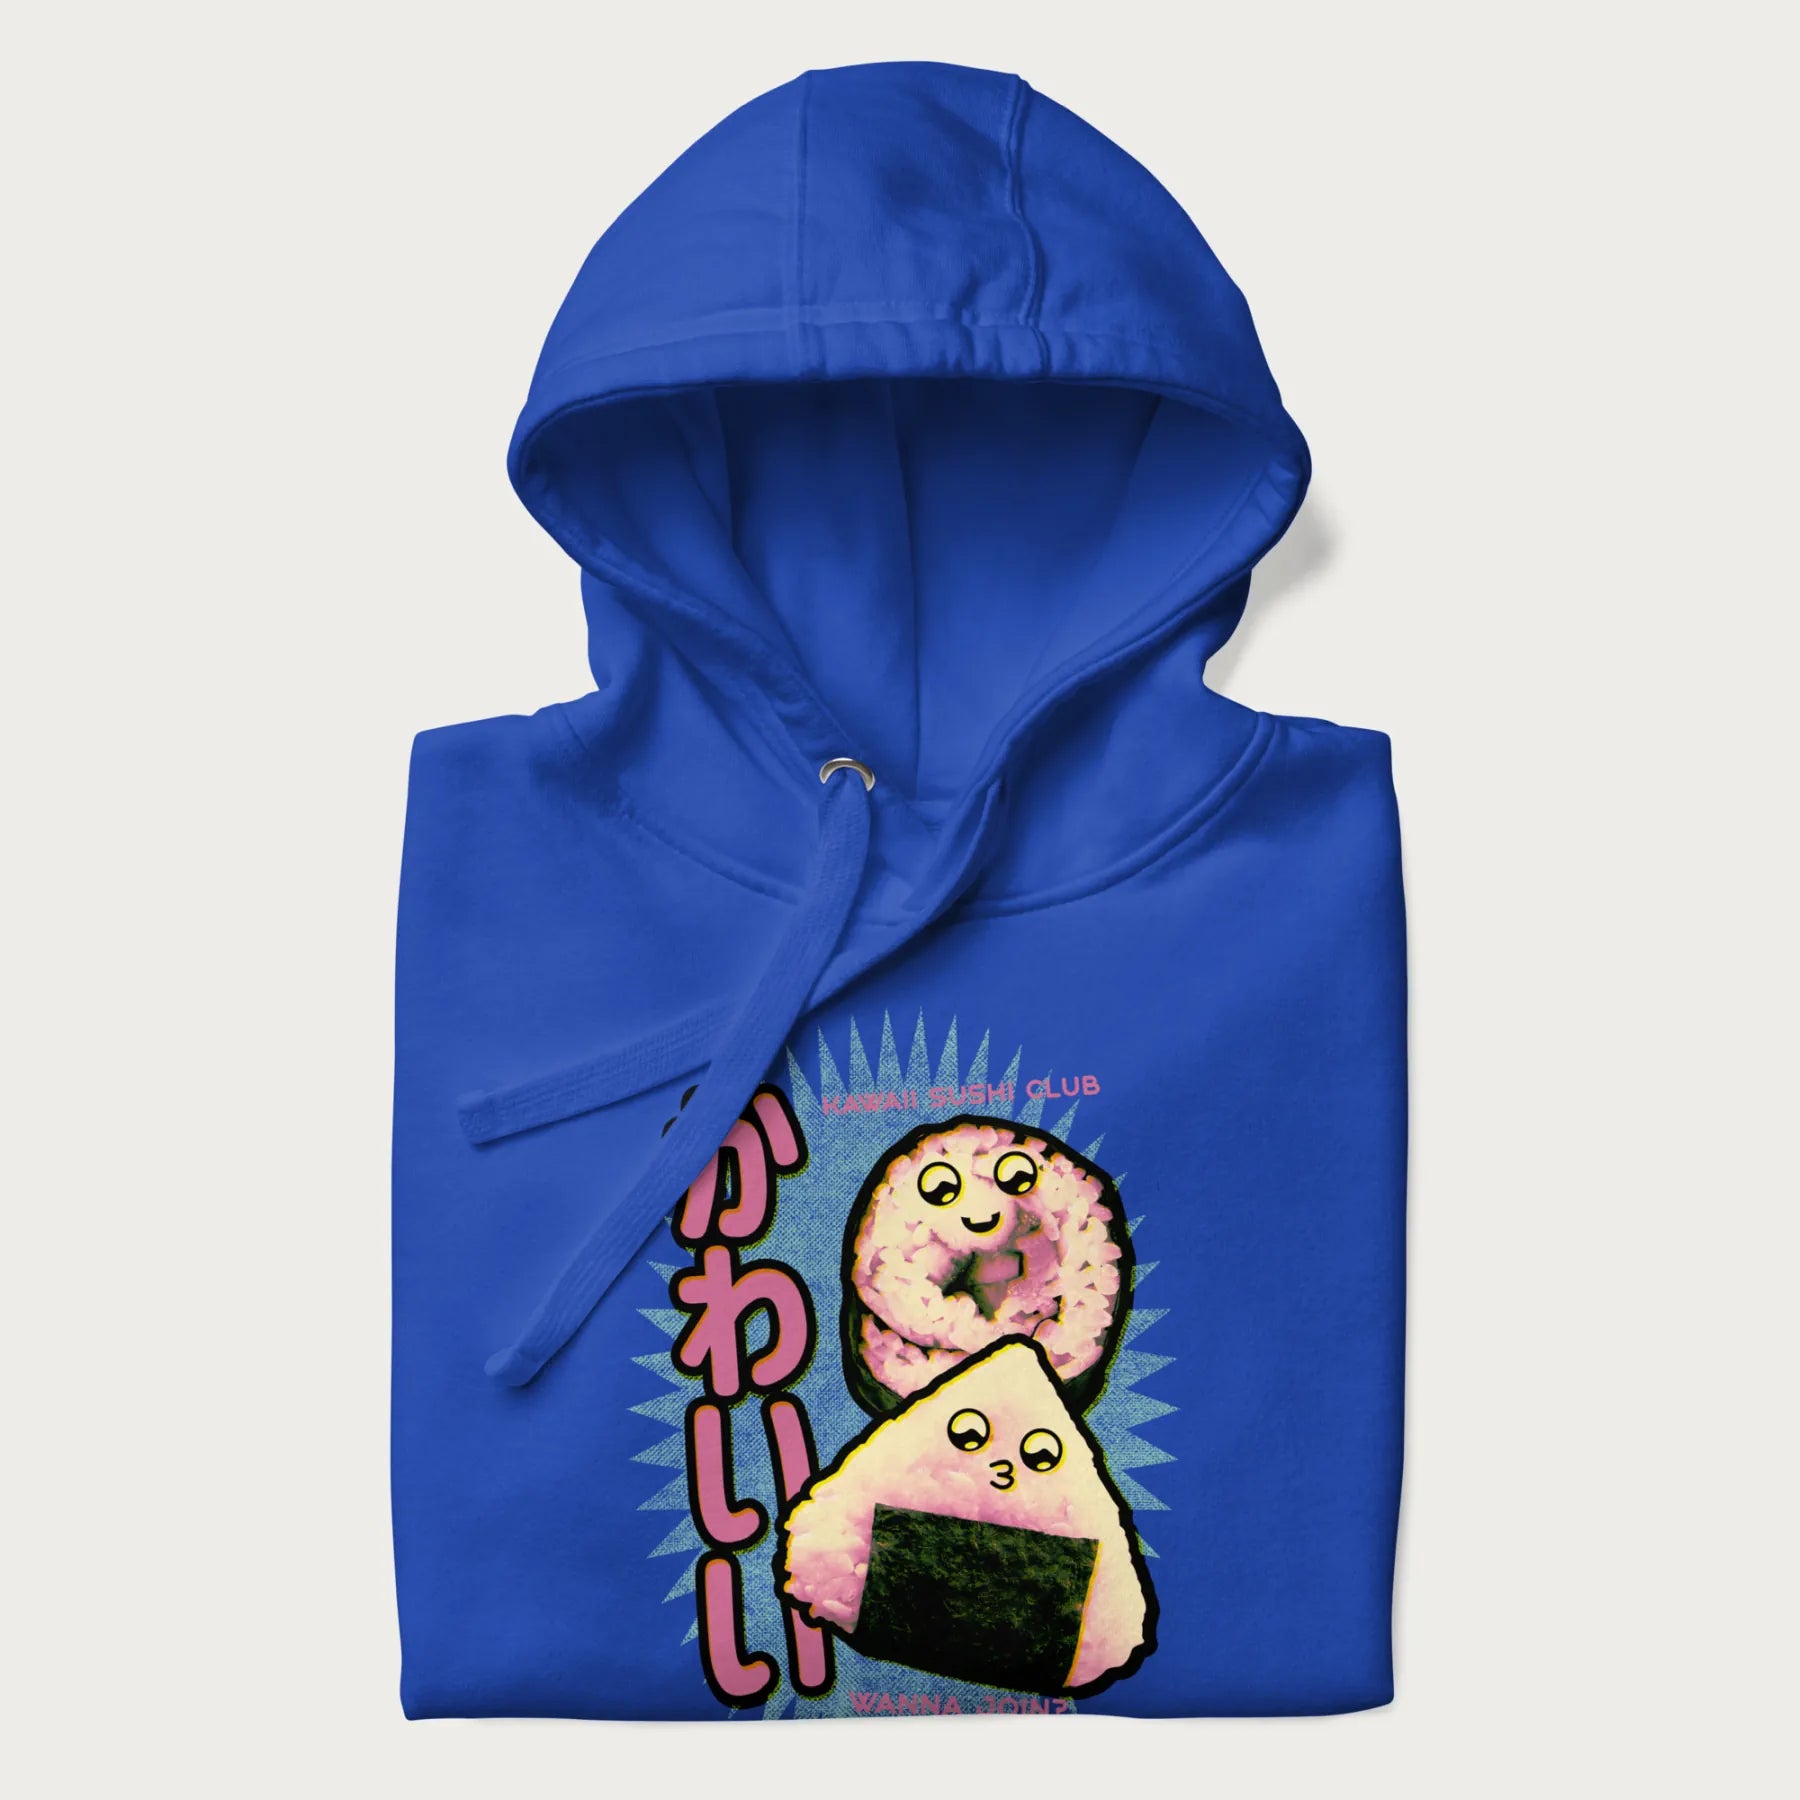 Folded royal blue hoodie featuring a cute sushi and onigiri graphic with the text "Kawaii Sushi Club", colorful neon accents and Japanese characters.